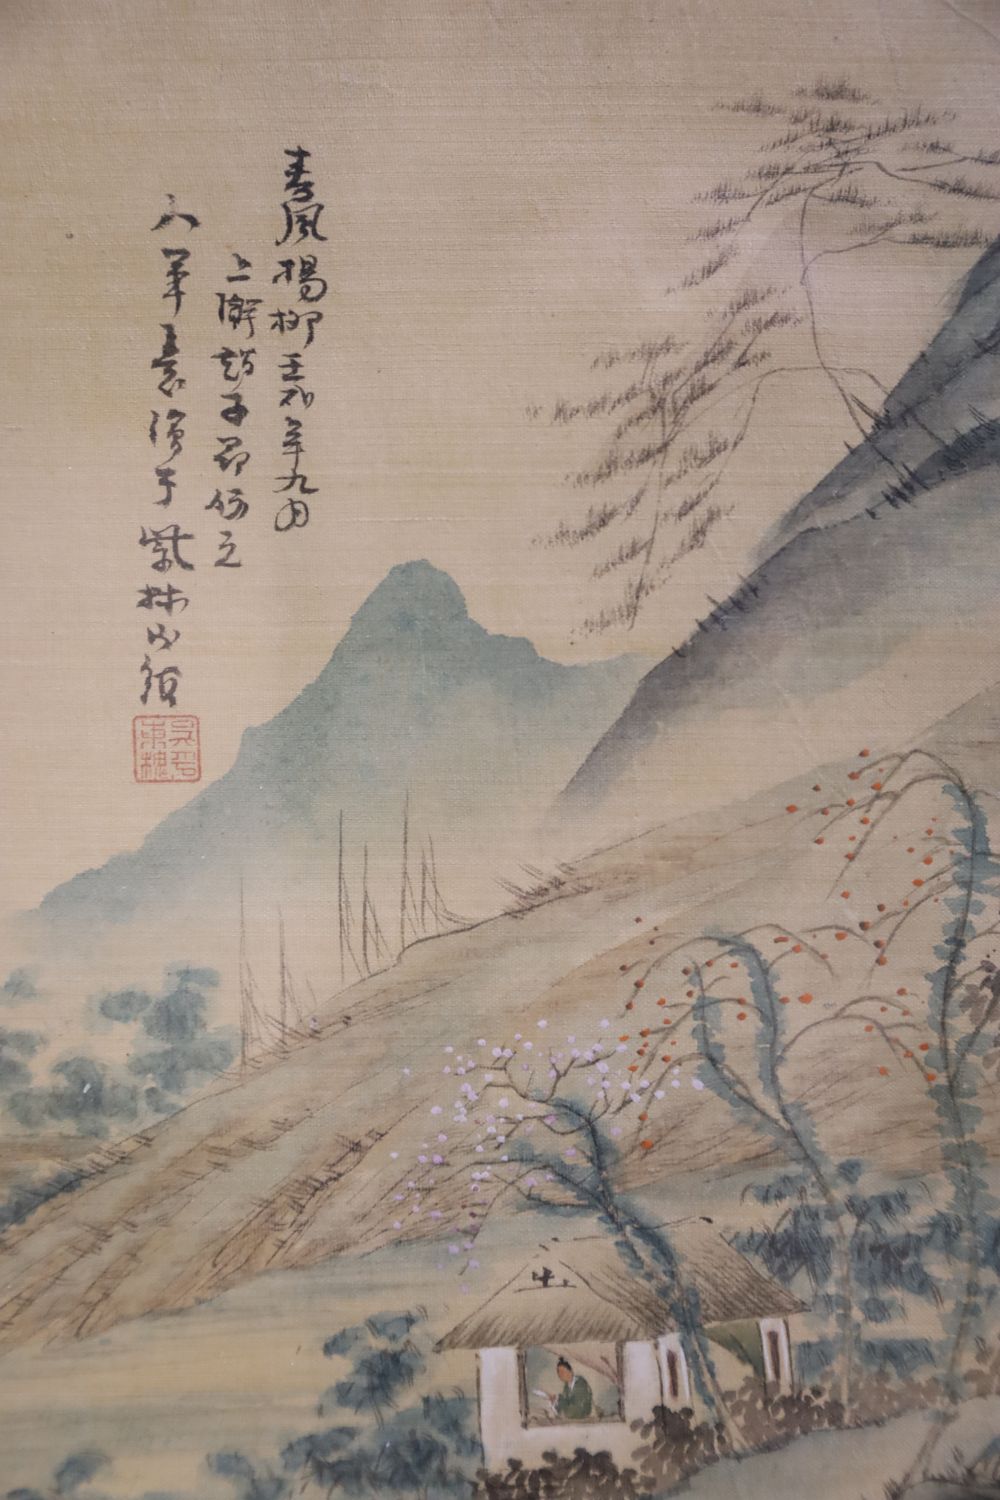 Chinese School, watercolour on silk, Figures in a mountain landscape, signed, 29 x 33cm